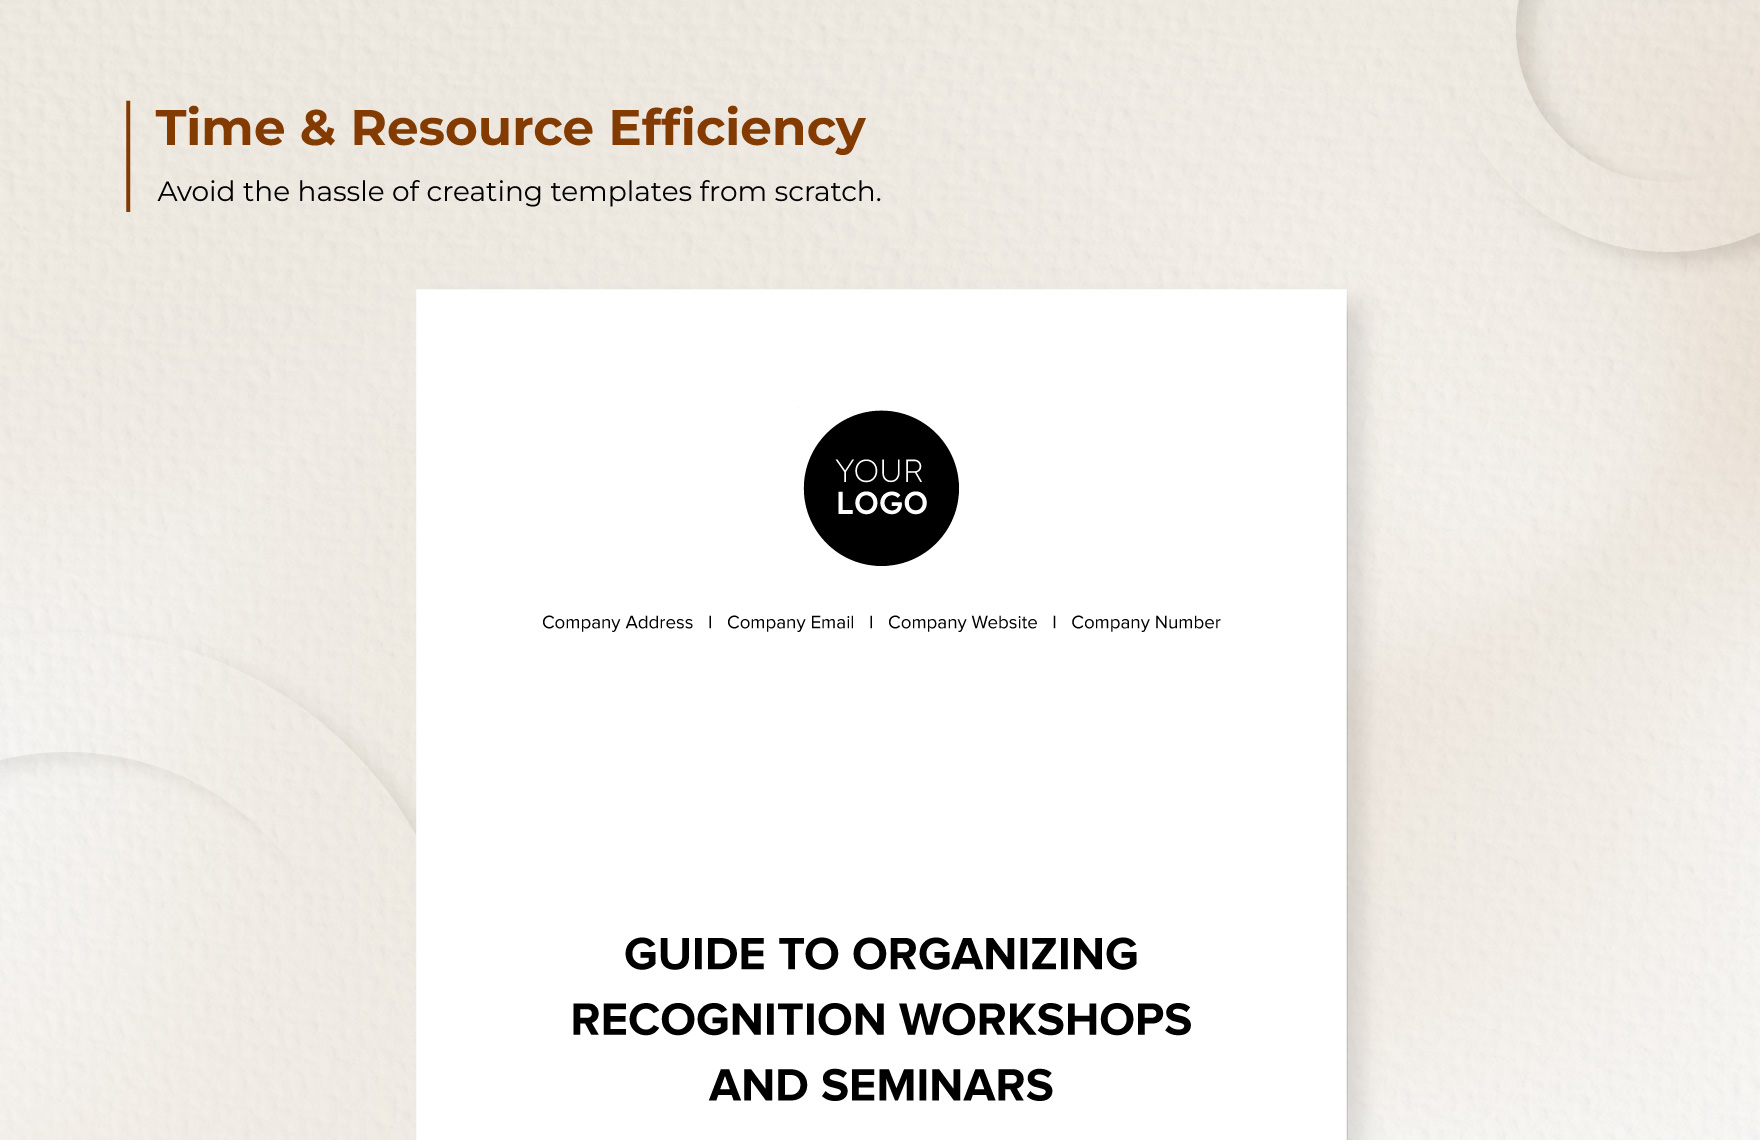 Guide to Organizing Recognition Workshops and Seminars HR Template